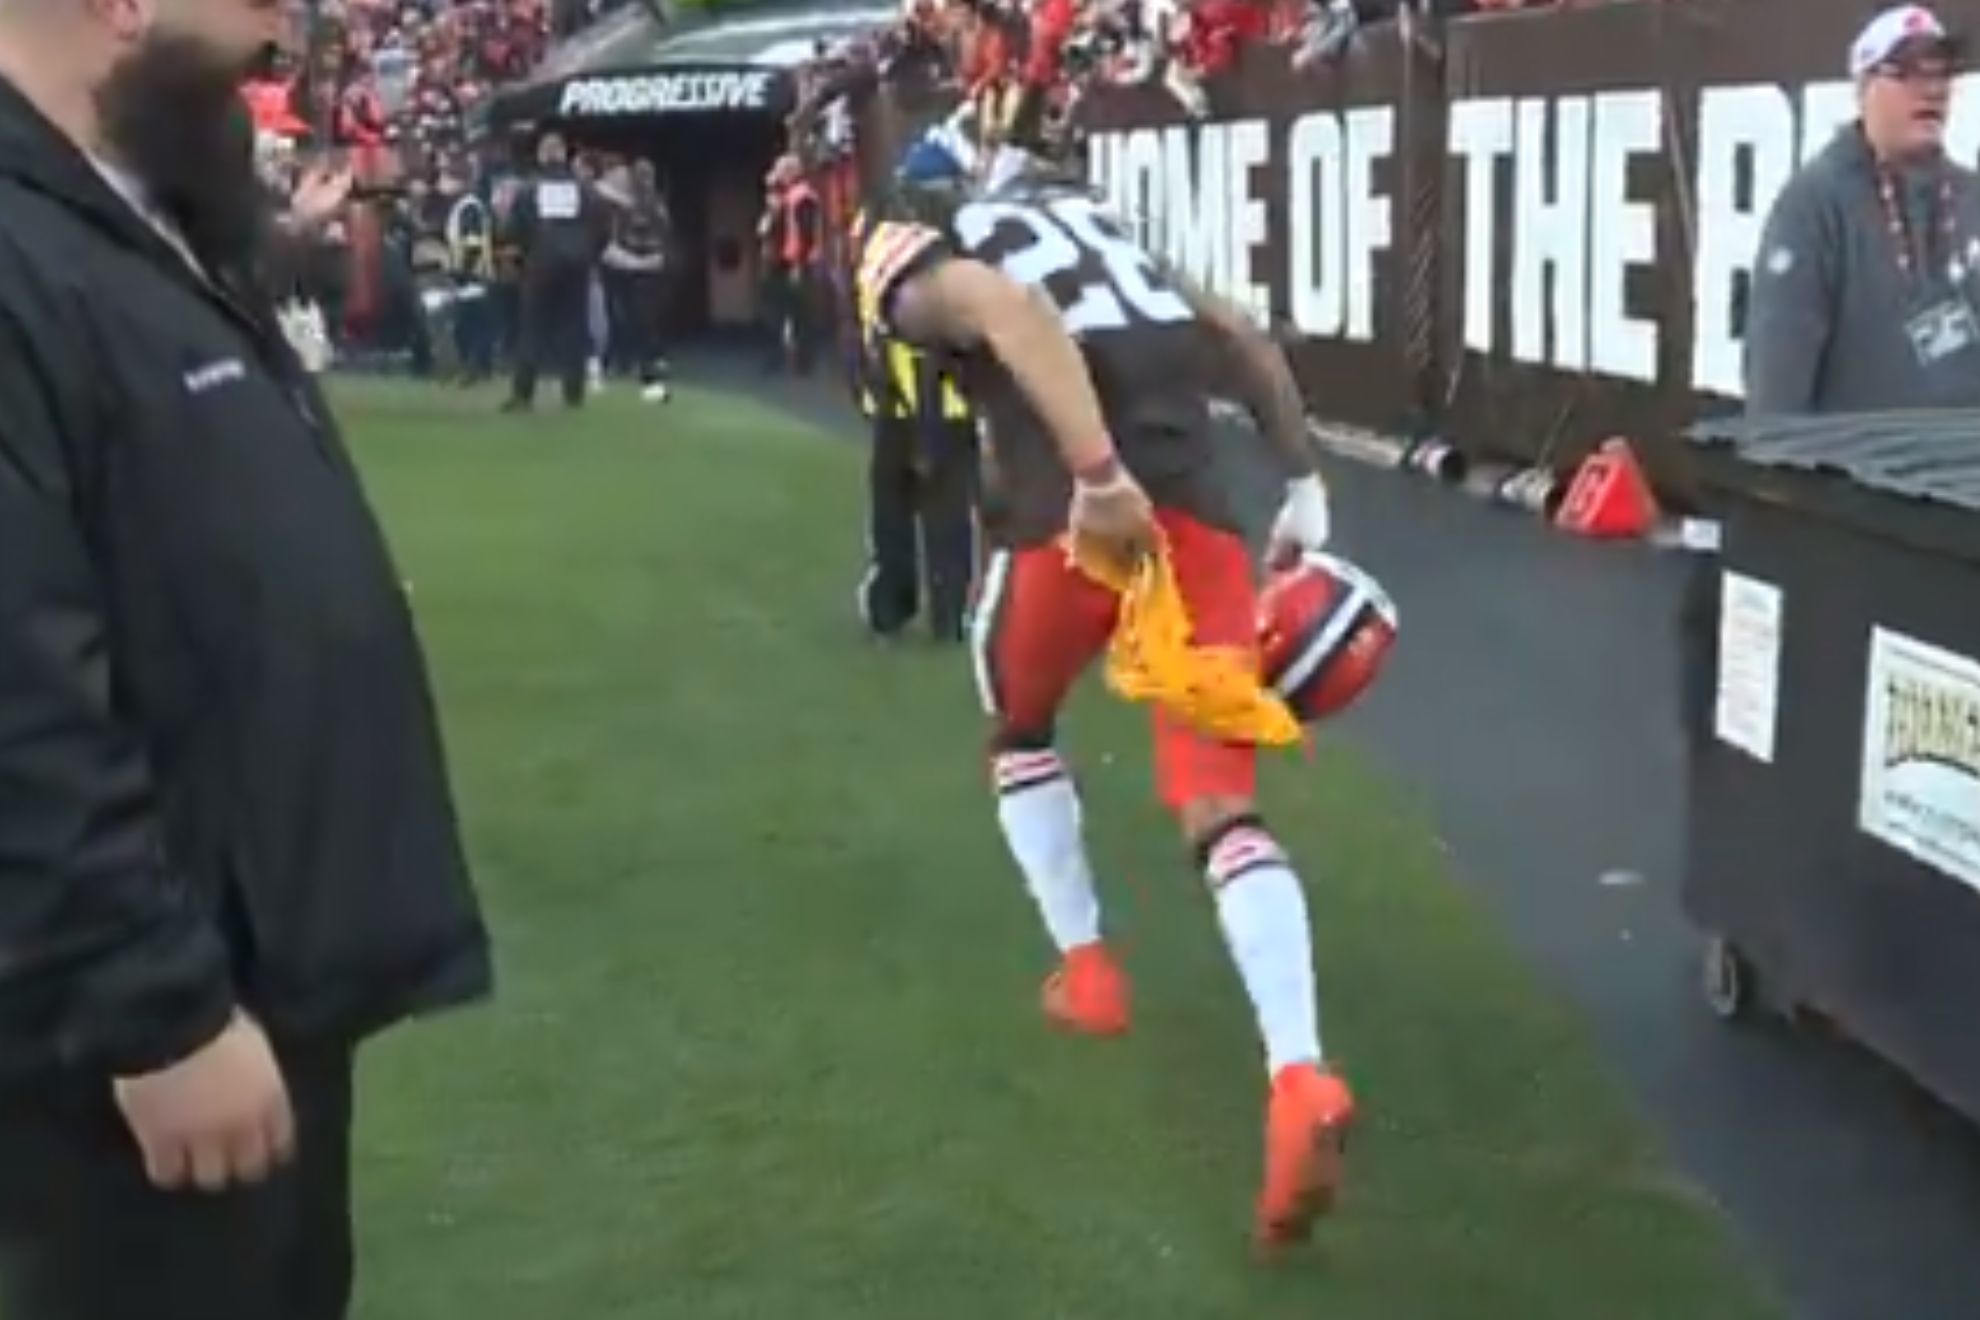 Browns player steals 'terrible towel' from Steelers fan and uses it as toilet paper